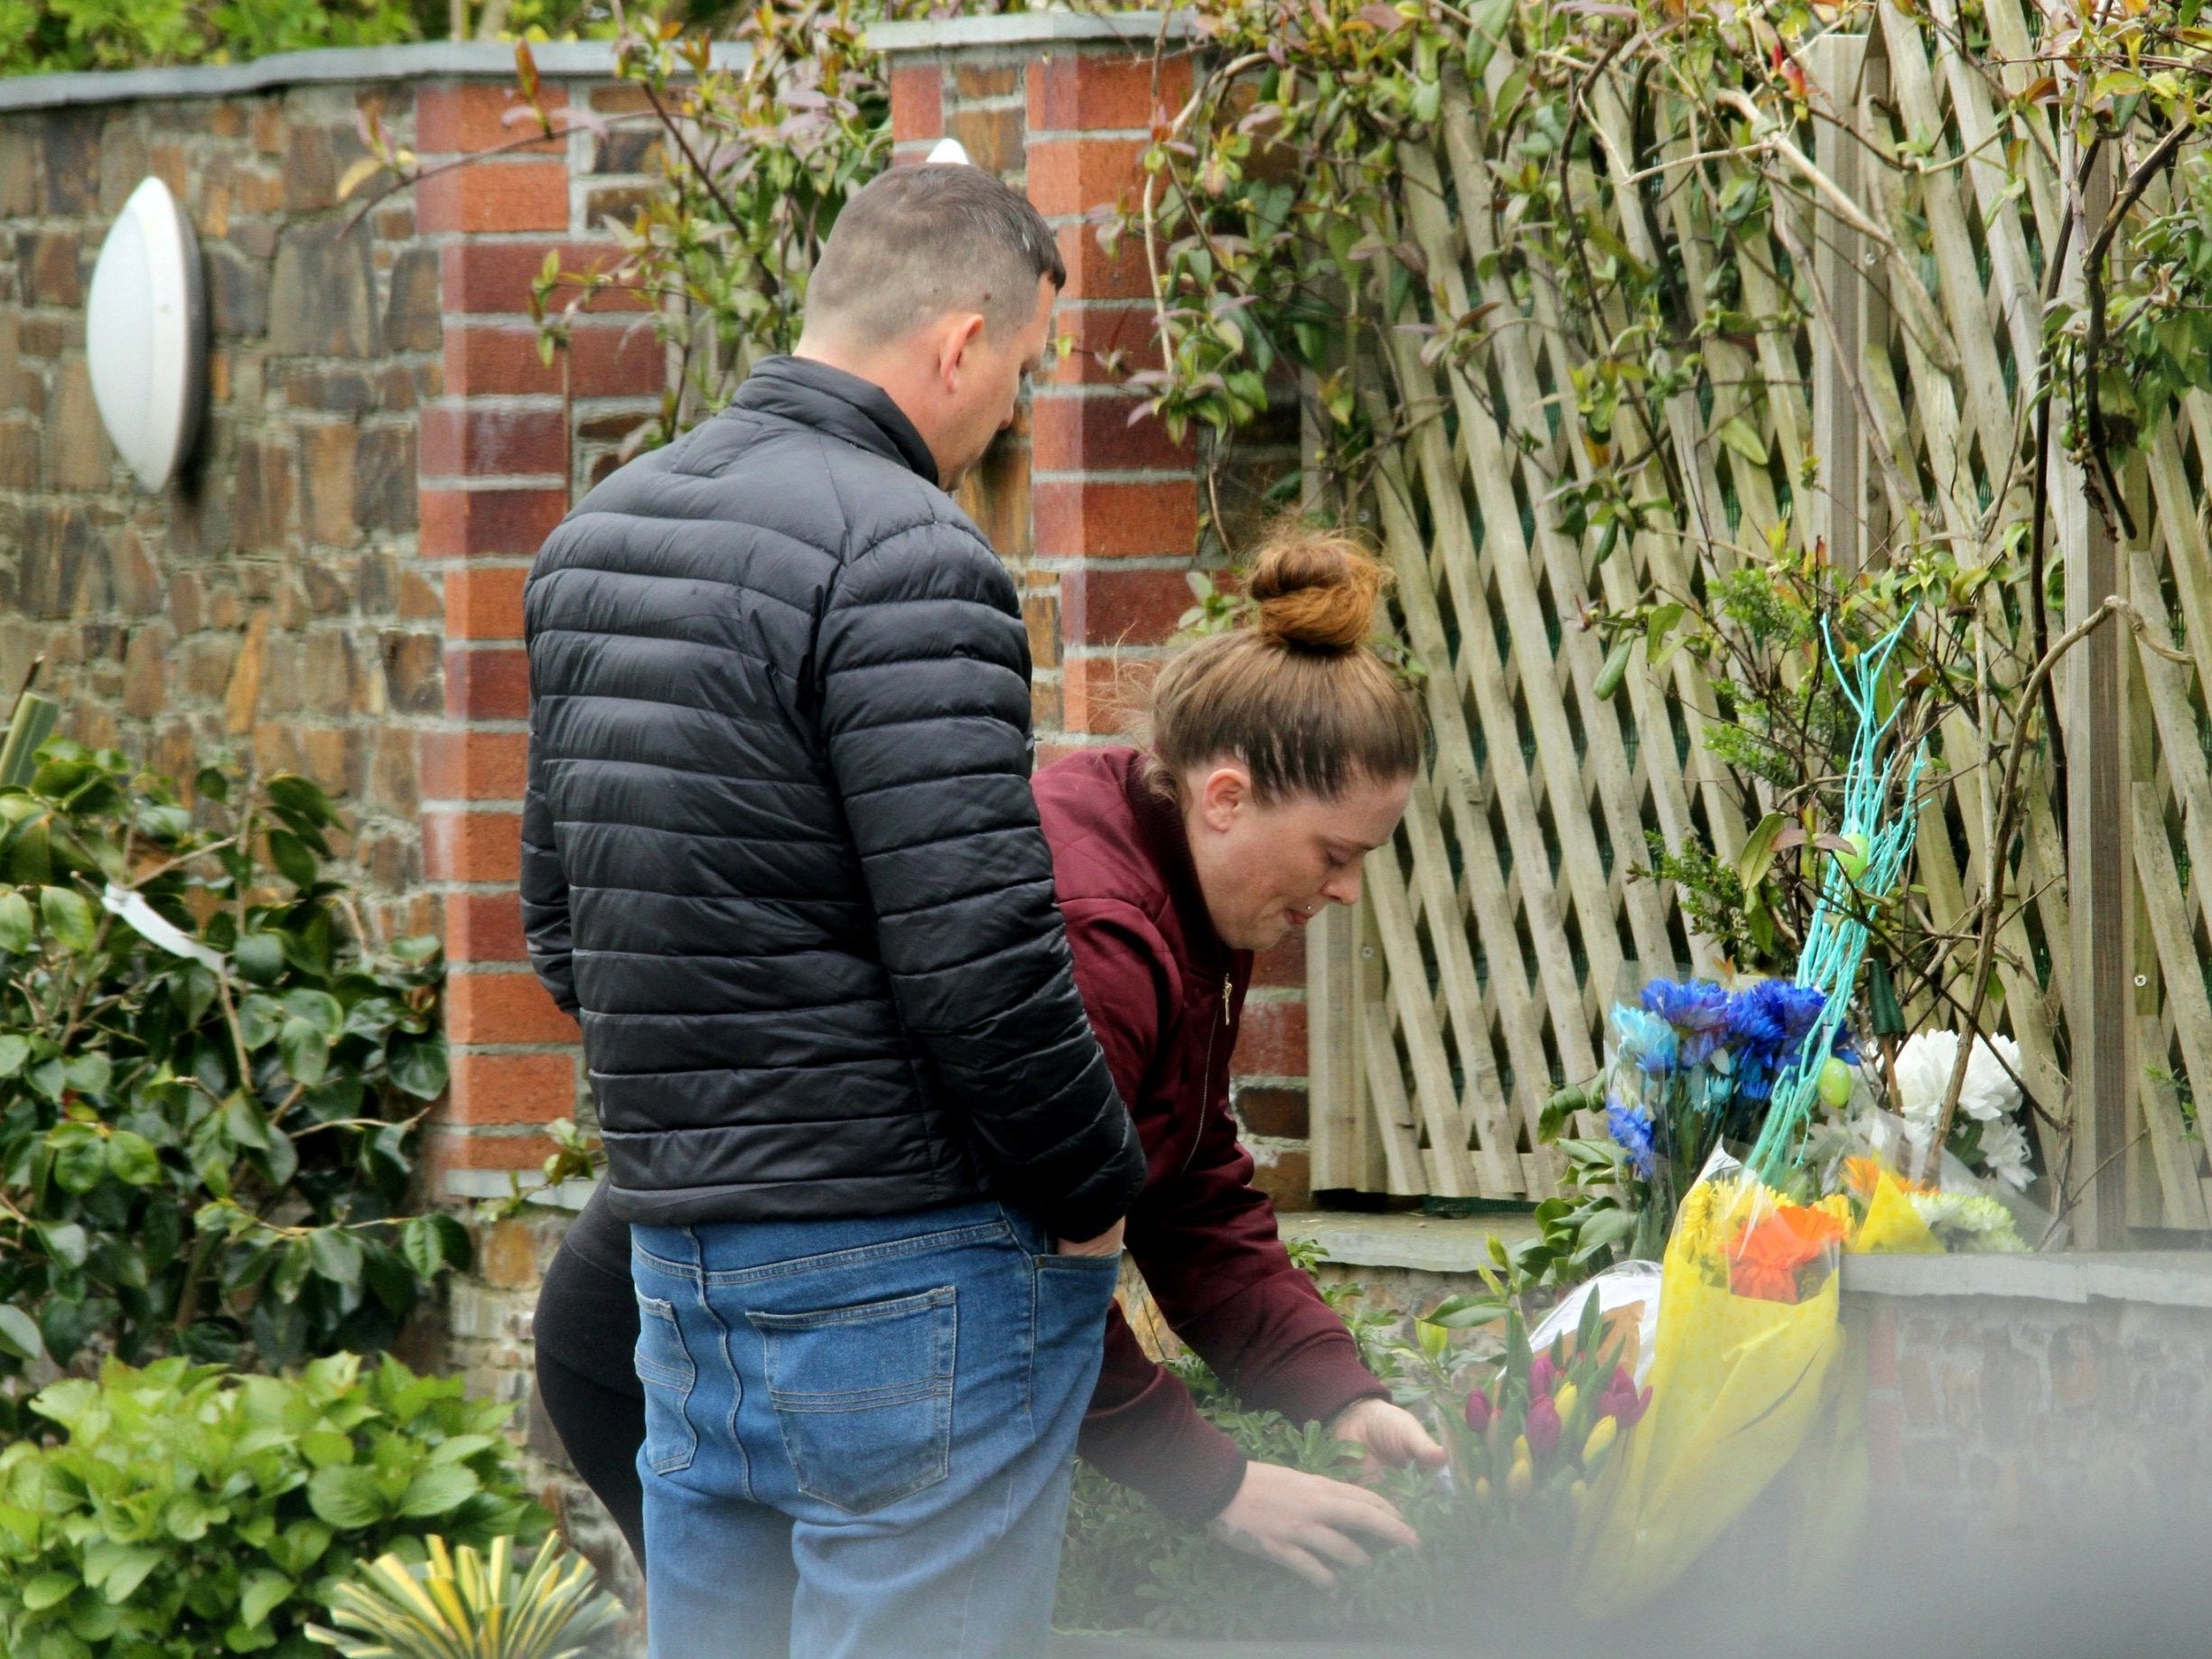 Relatives leave flowers at the entrance to Tencreek Holiday Park, Looe, Cornwall on 14 April 2019, where Frankie Macritchie (9) was tragically killed by a large dog in the early hours of Saturday morning.